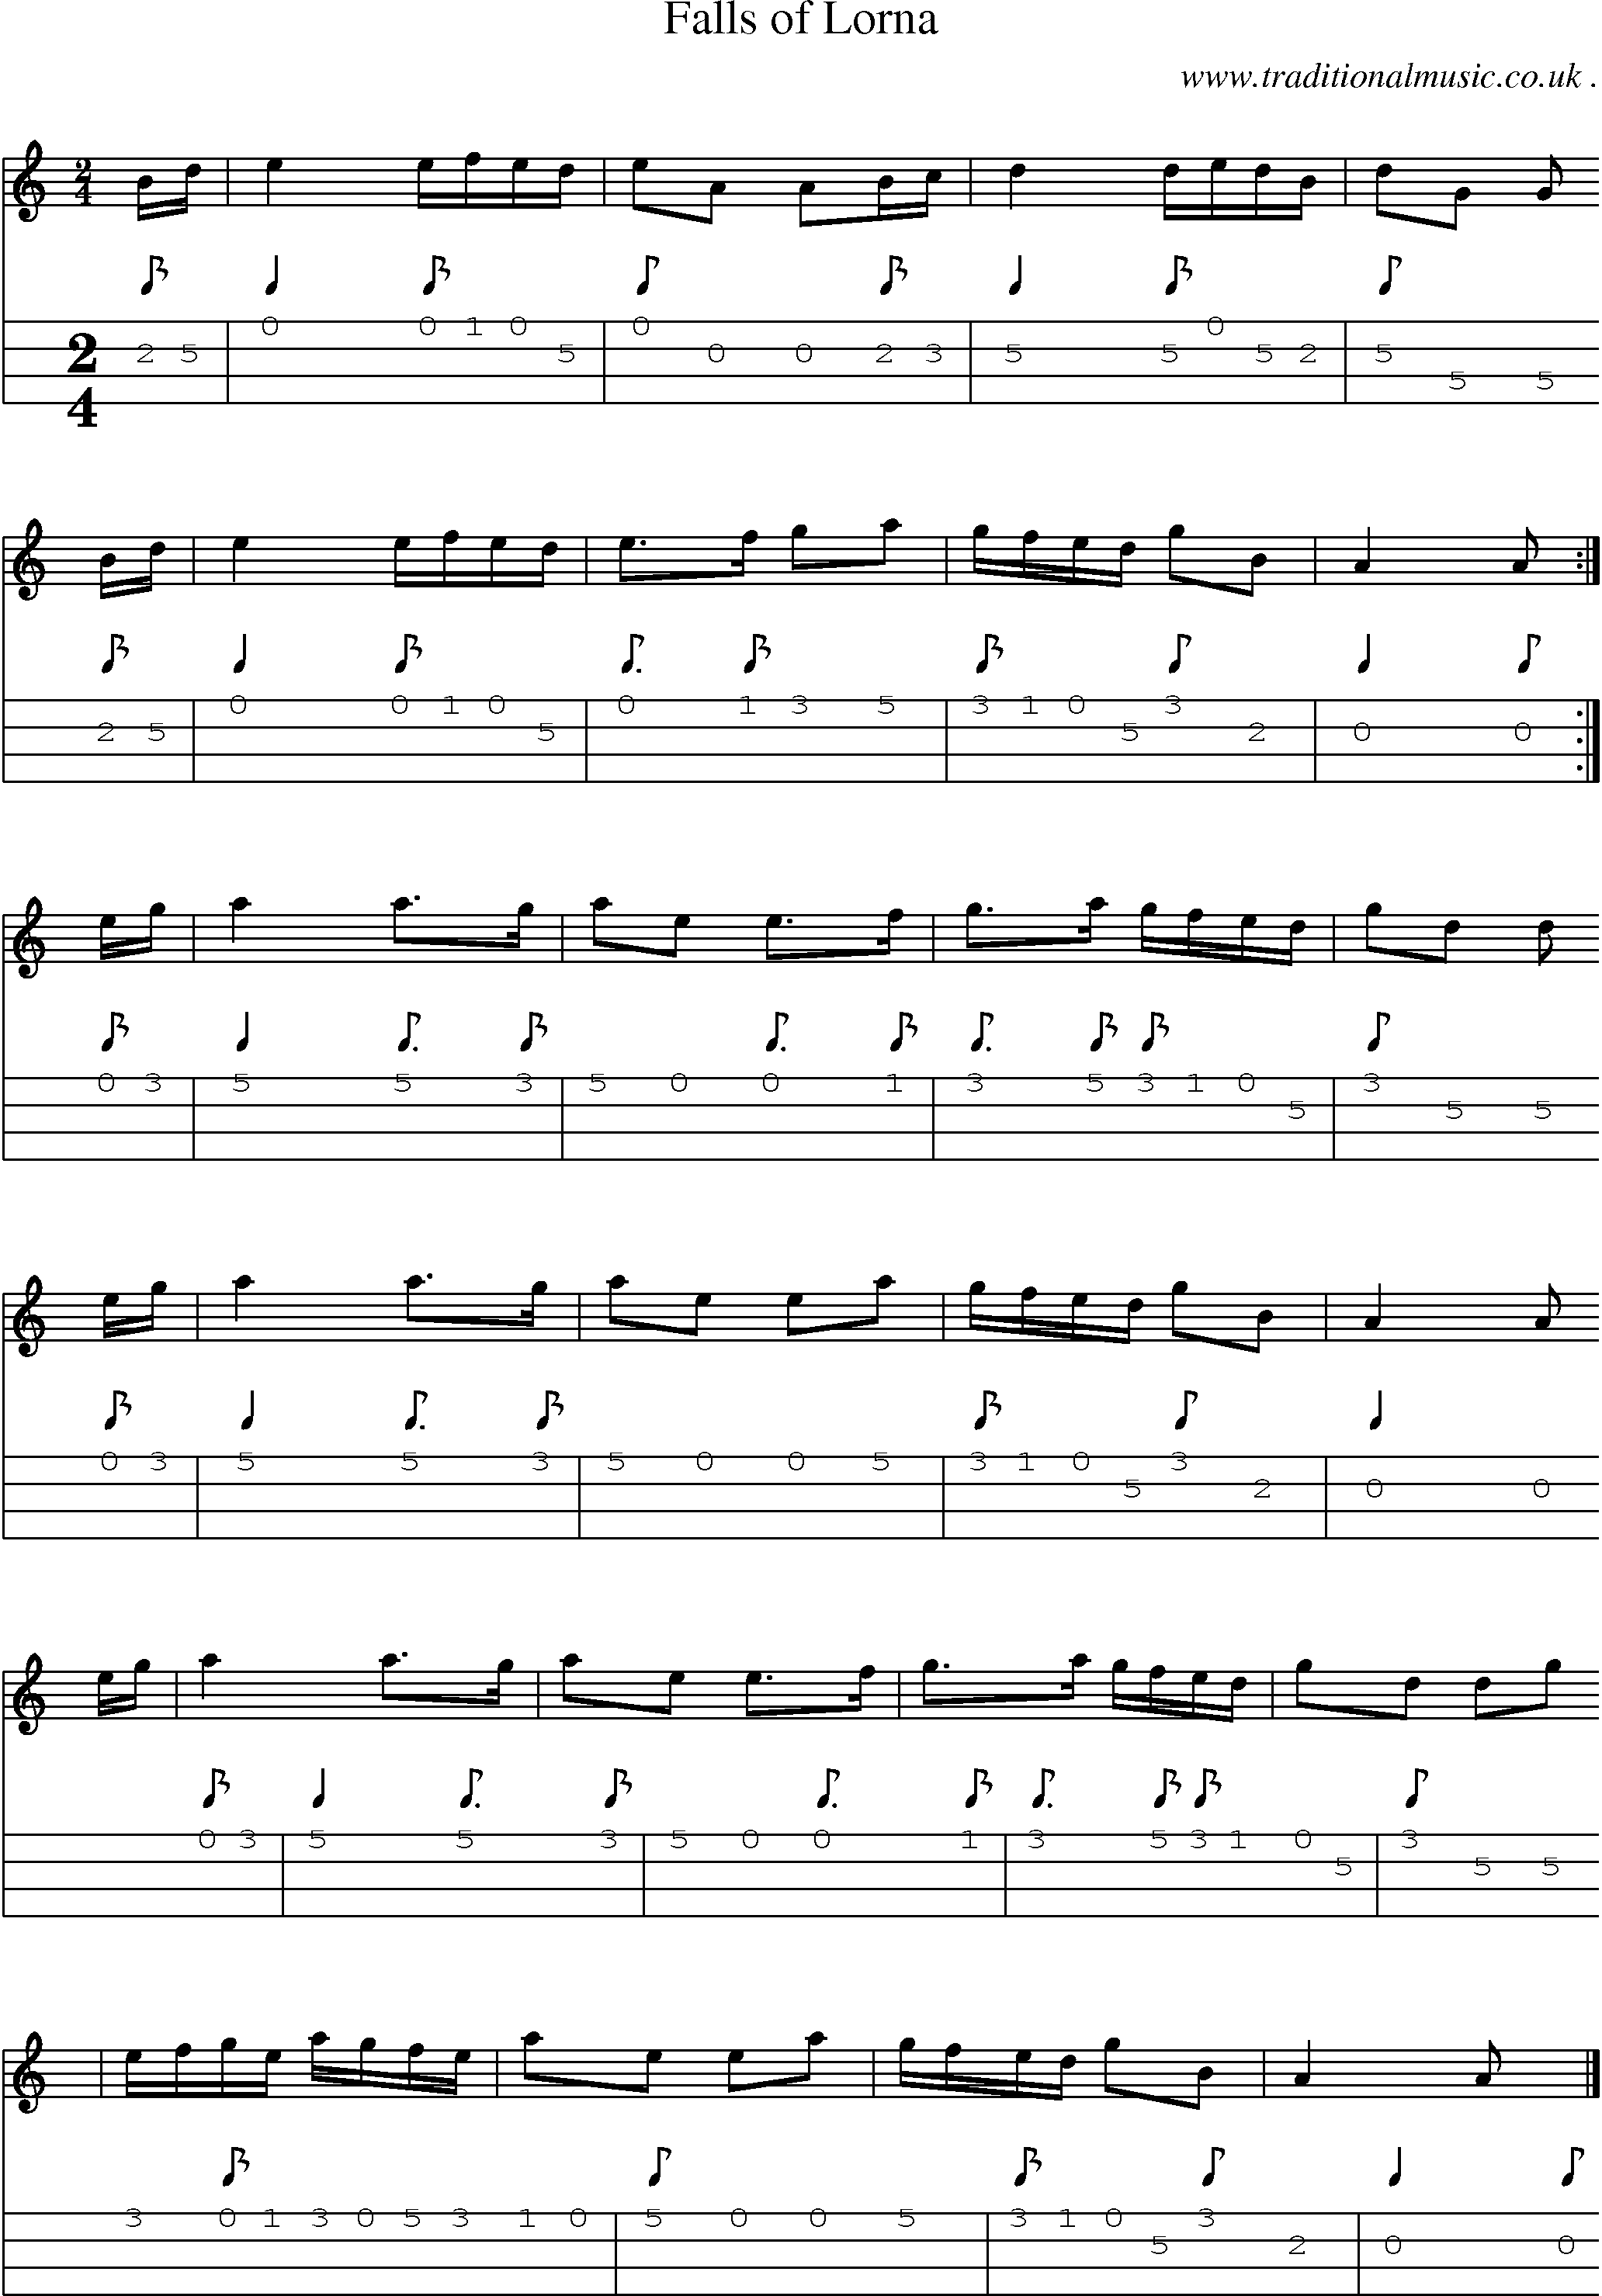 Sheet-music  score, Chords and Mandolin Tabs for Falls Of Lorna